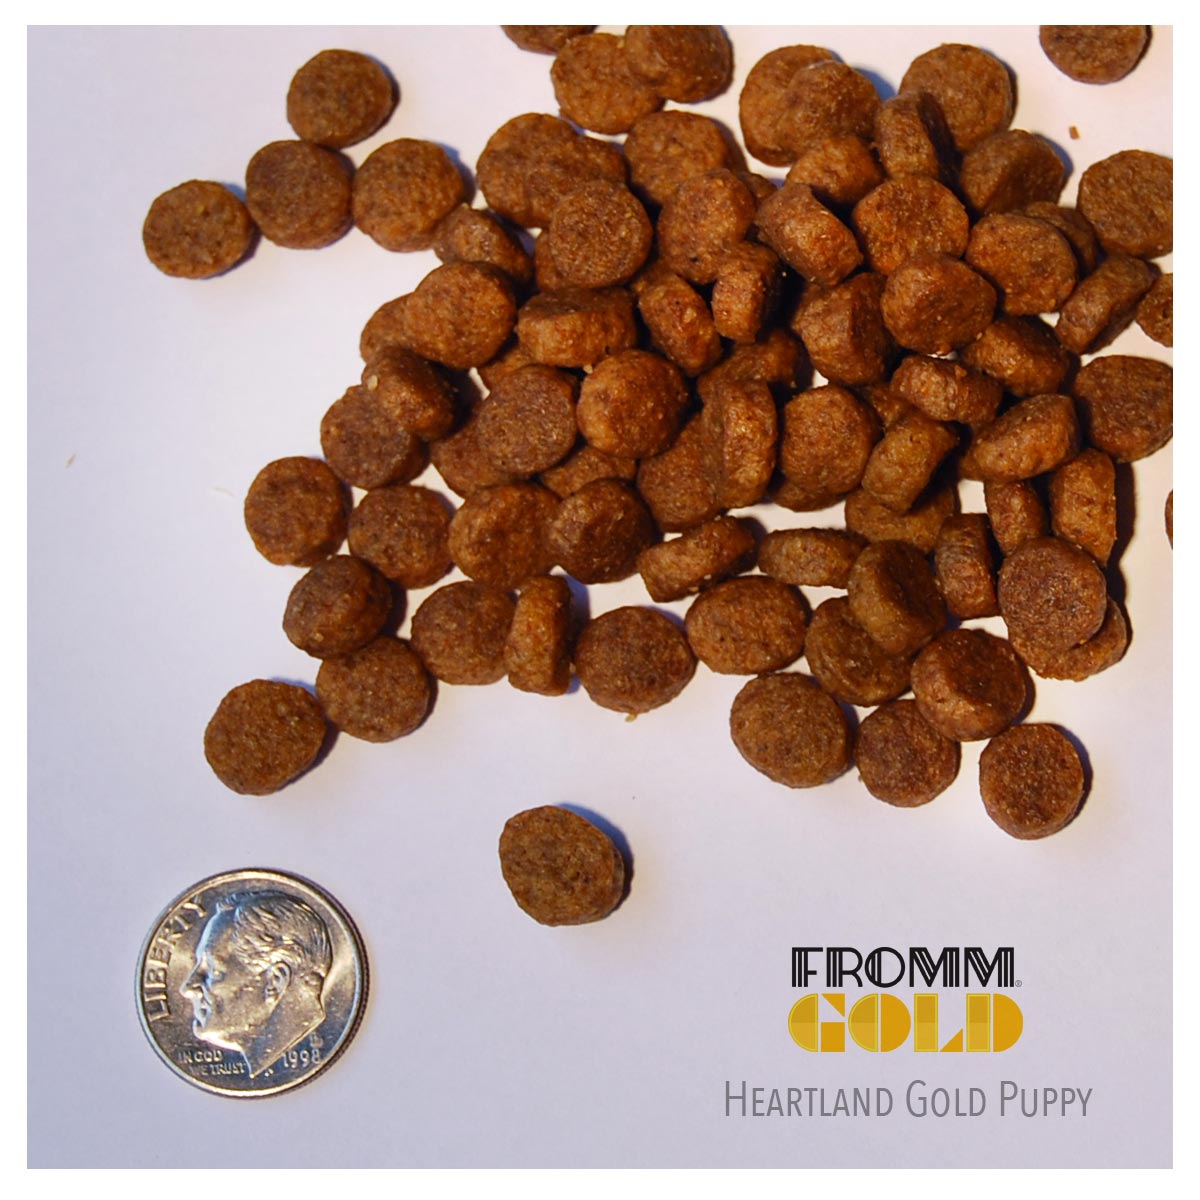 Fromm® Family Heartland Gold® Puppy